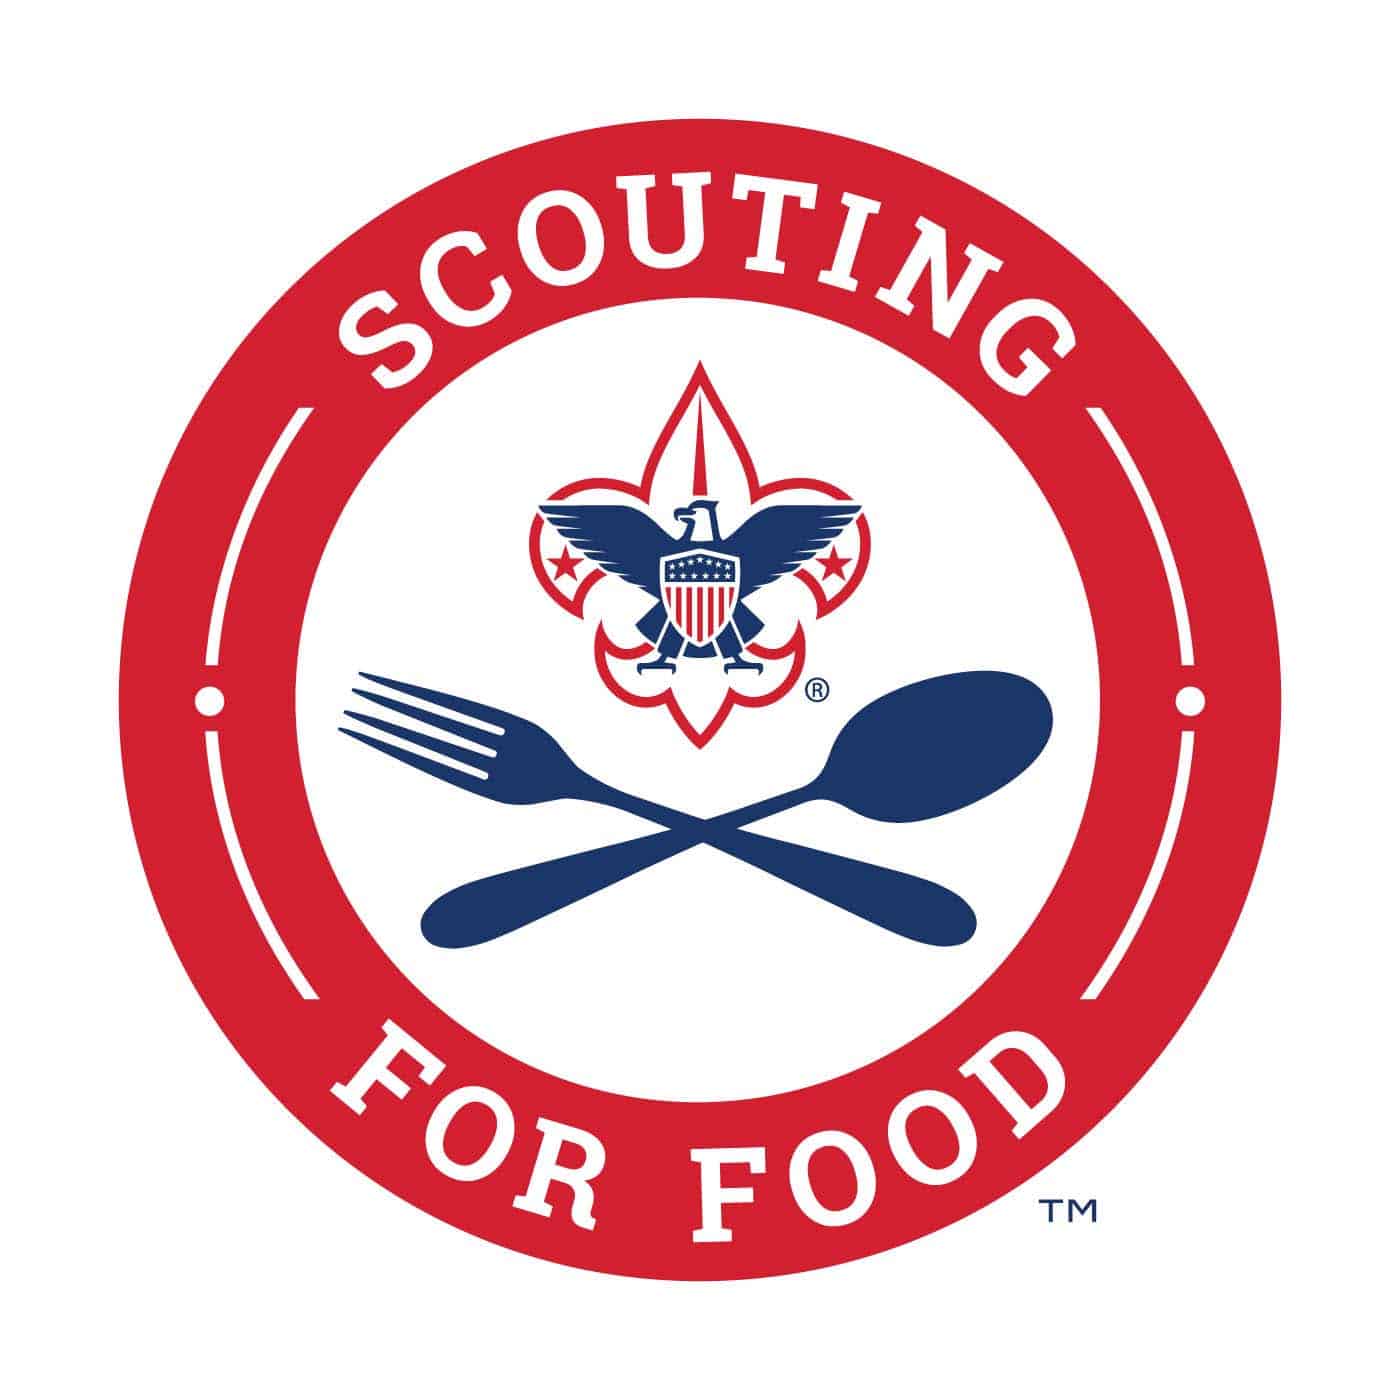 Scouting for Food Logo